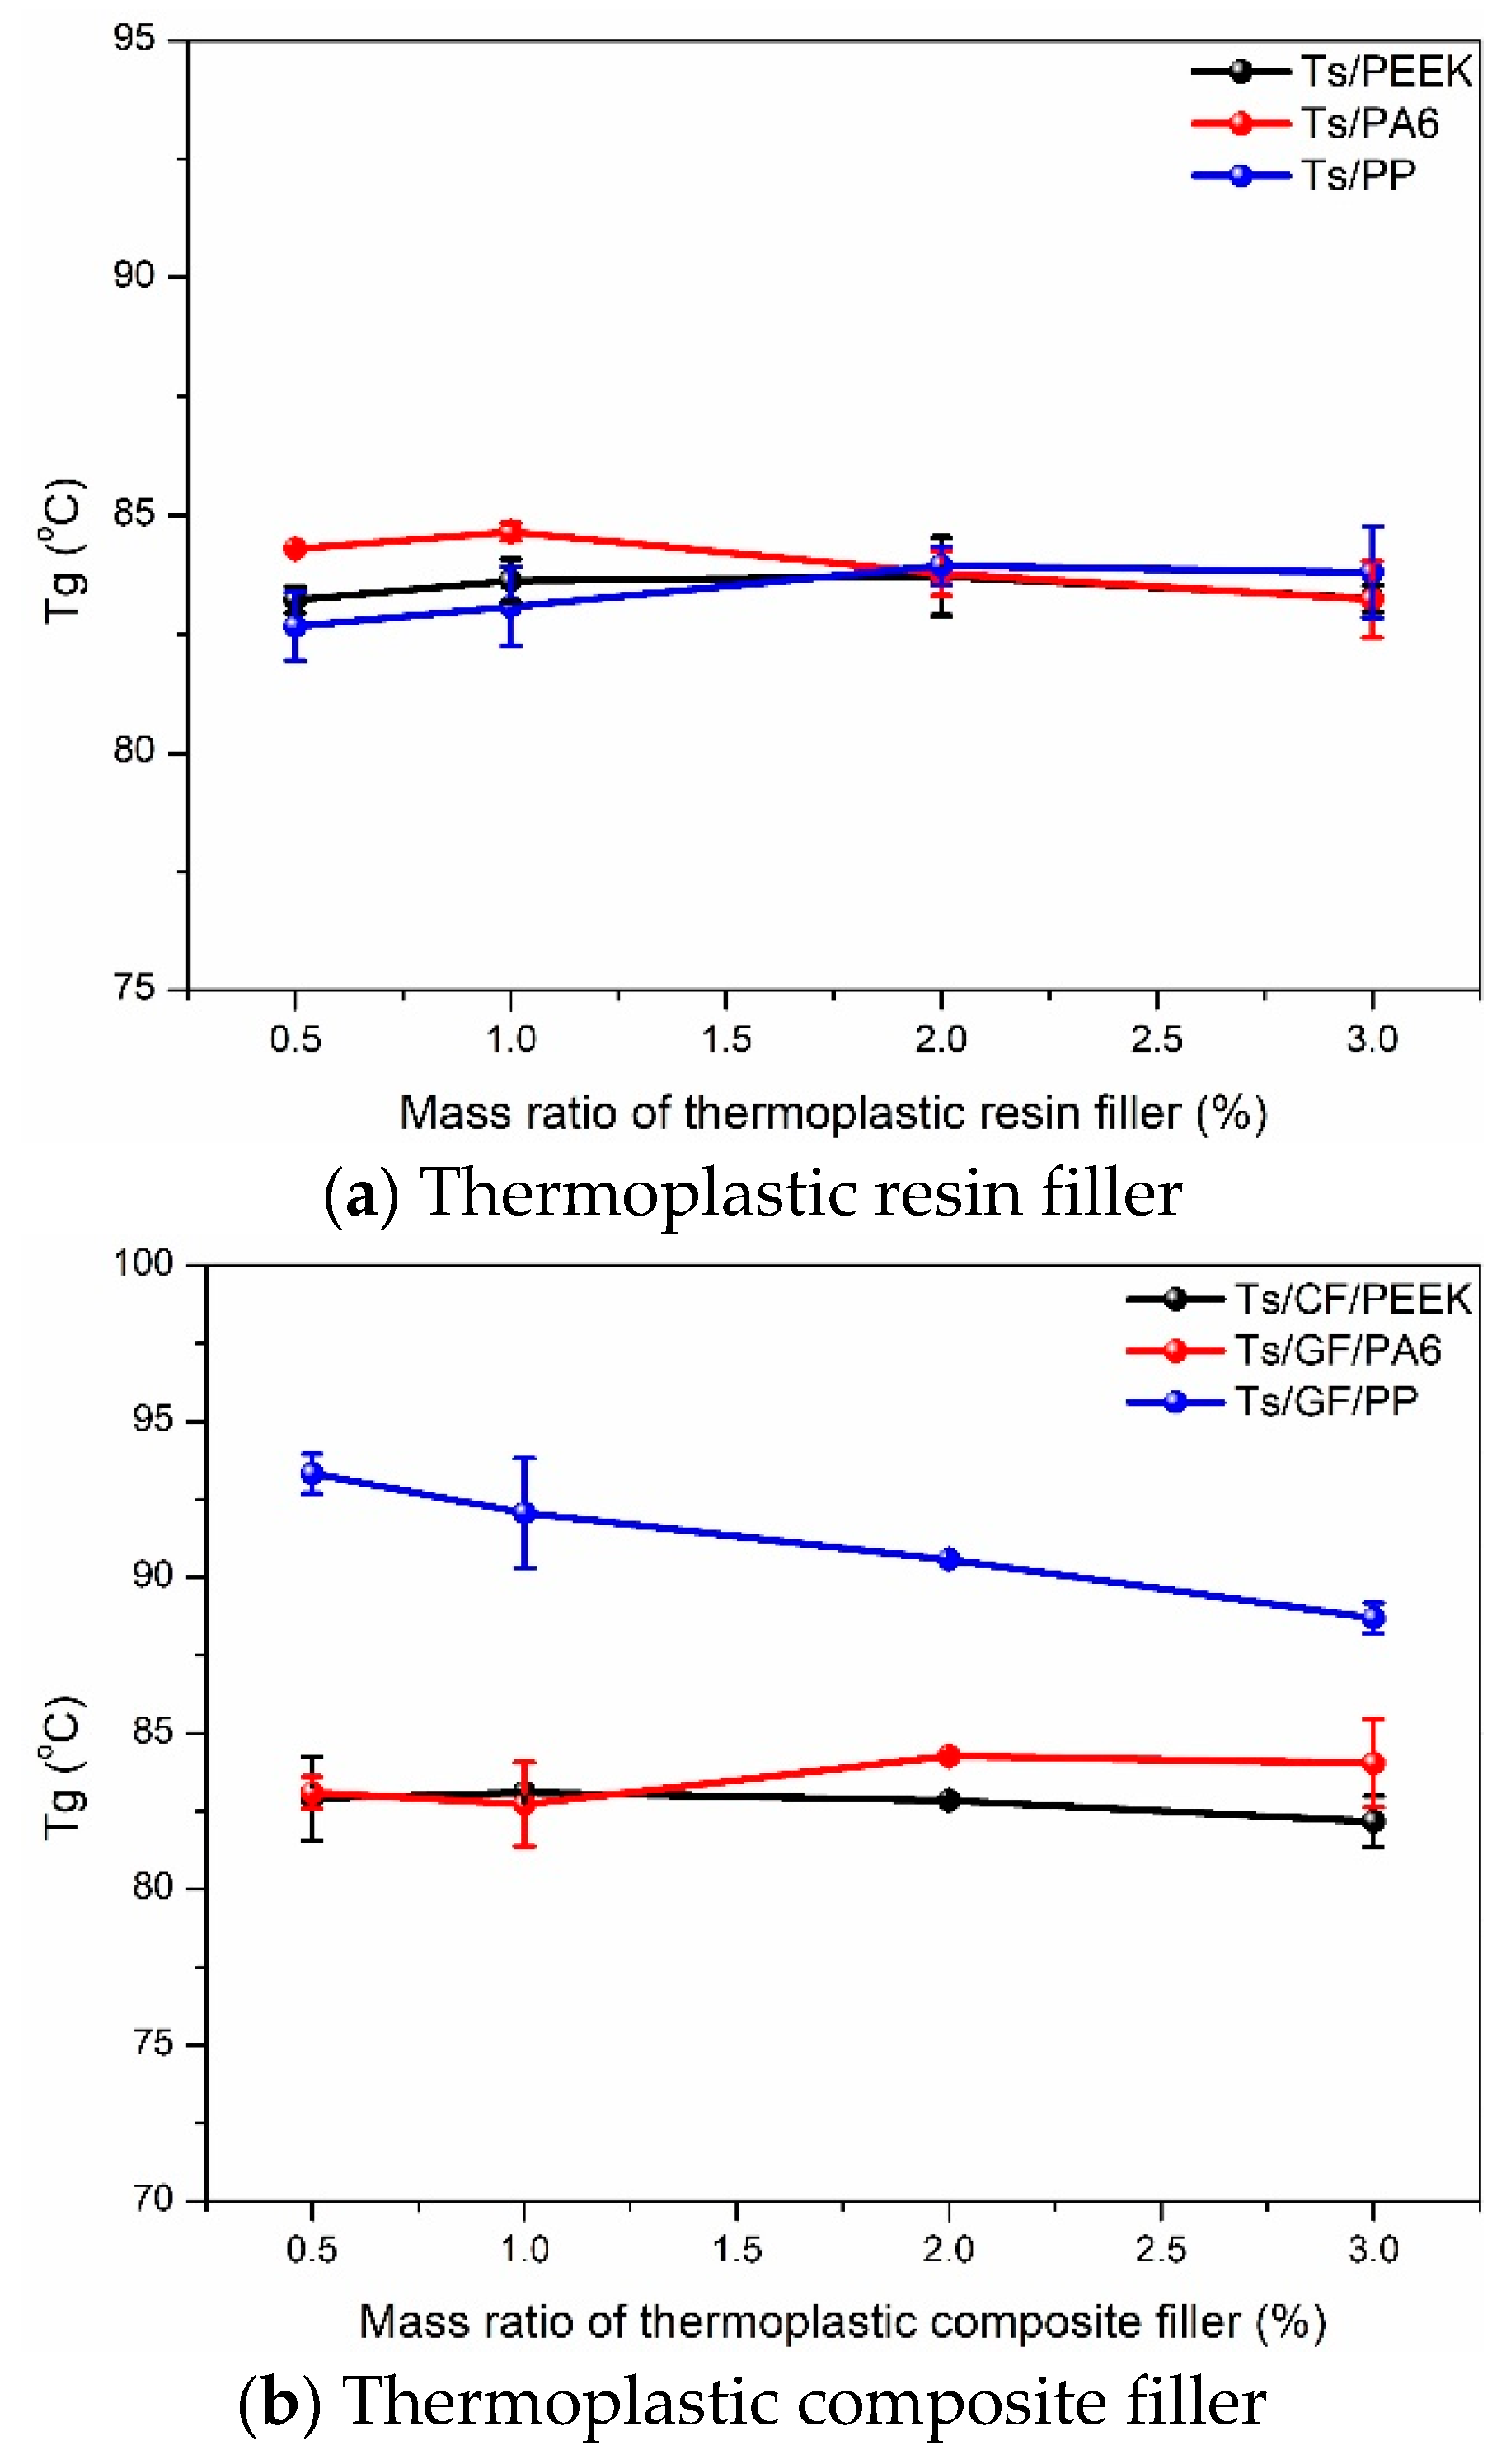 Effects of thermoplastic resin and composite fillers on failure